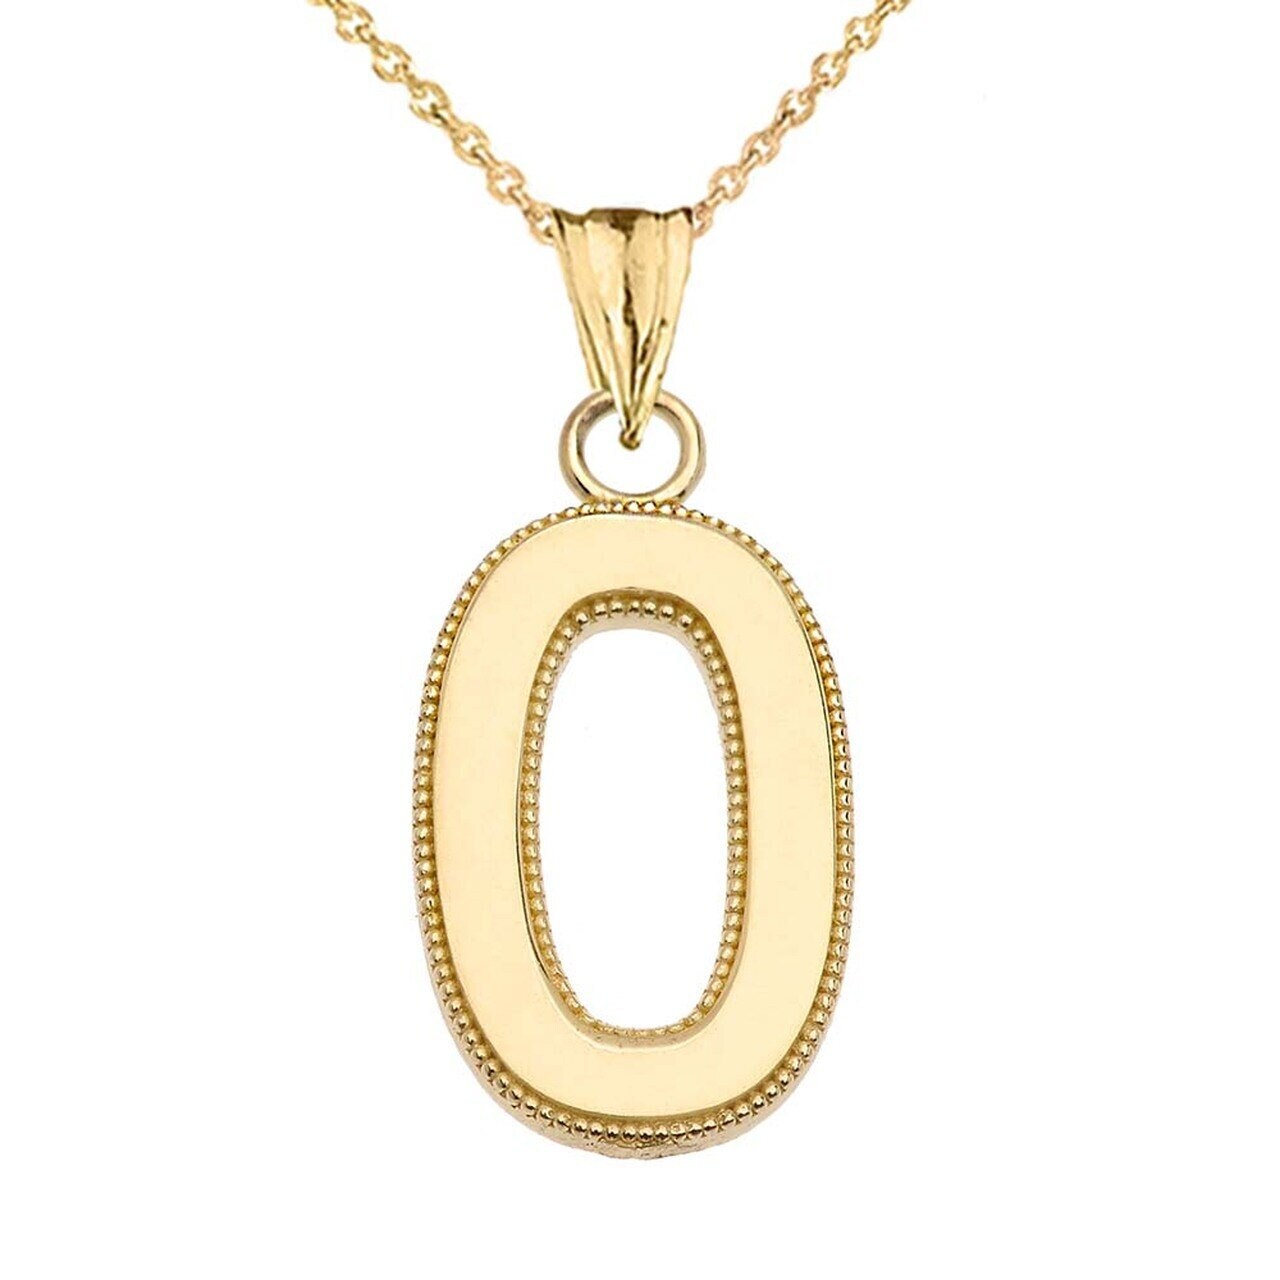 Personalized Yellow Gold Milgrain Initial Pendant Necklace - Etsy